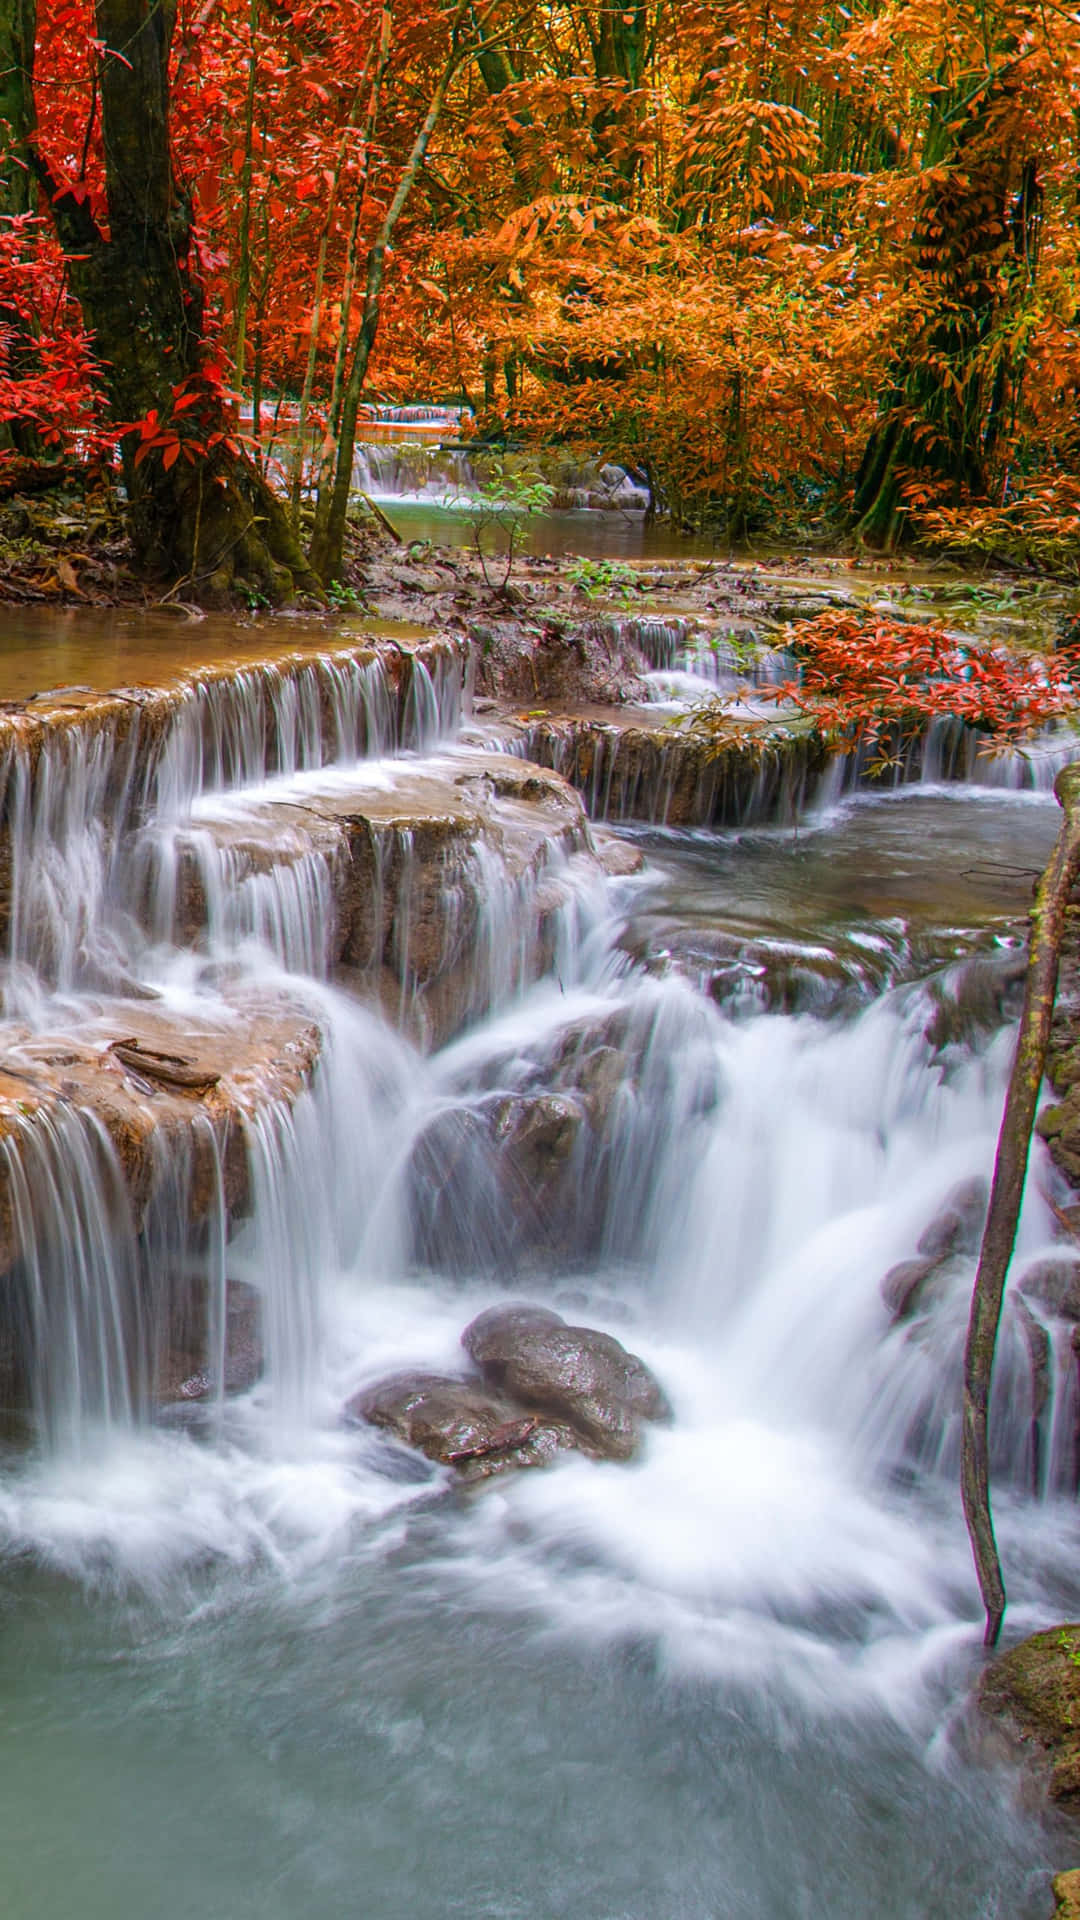 Enjoy the tranquillity of an iPhone Waterfall Wallpaper